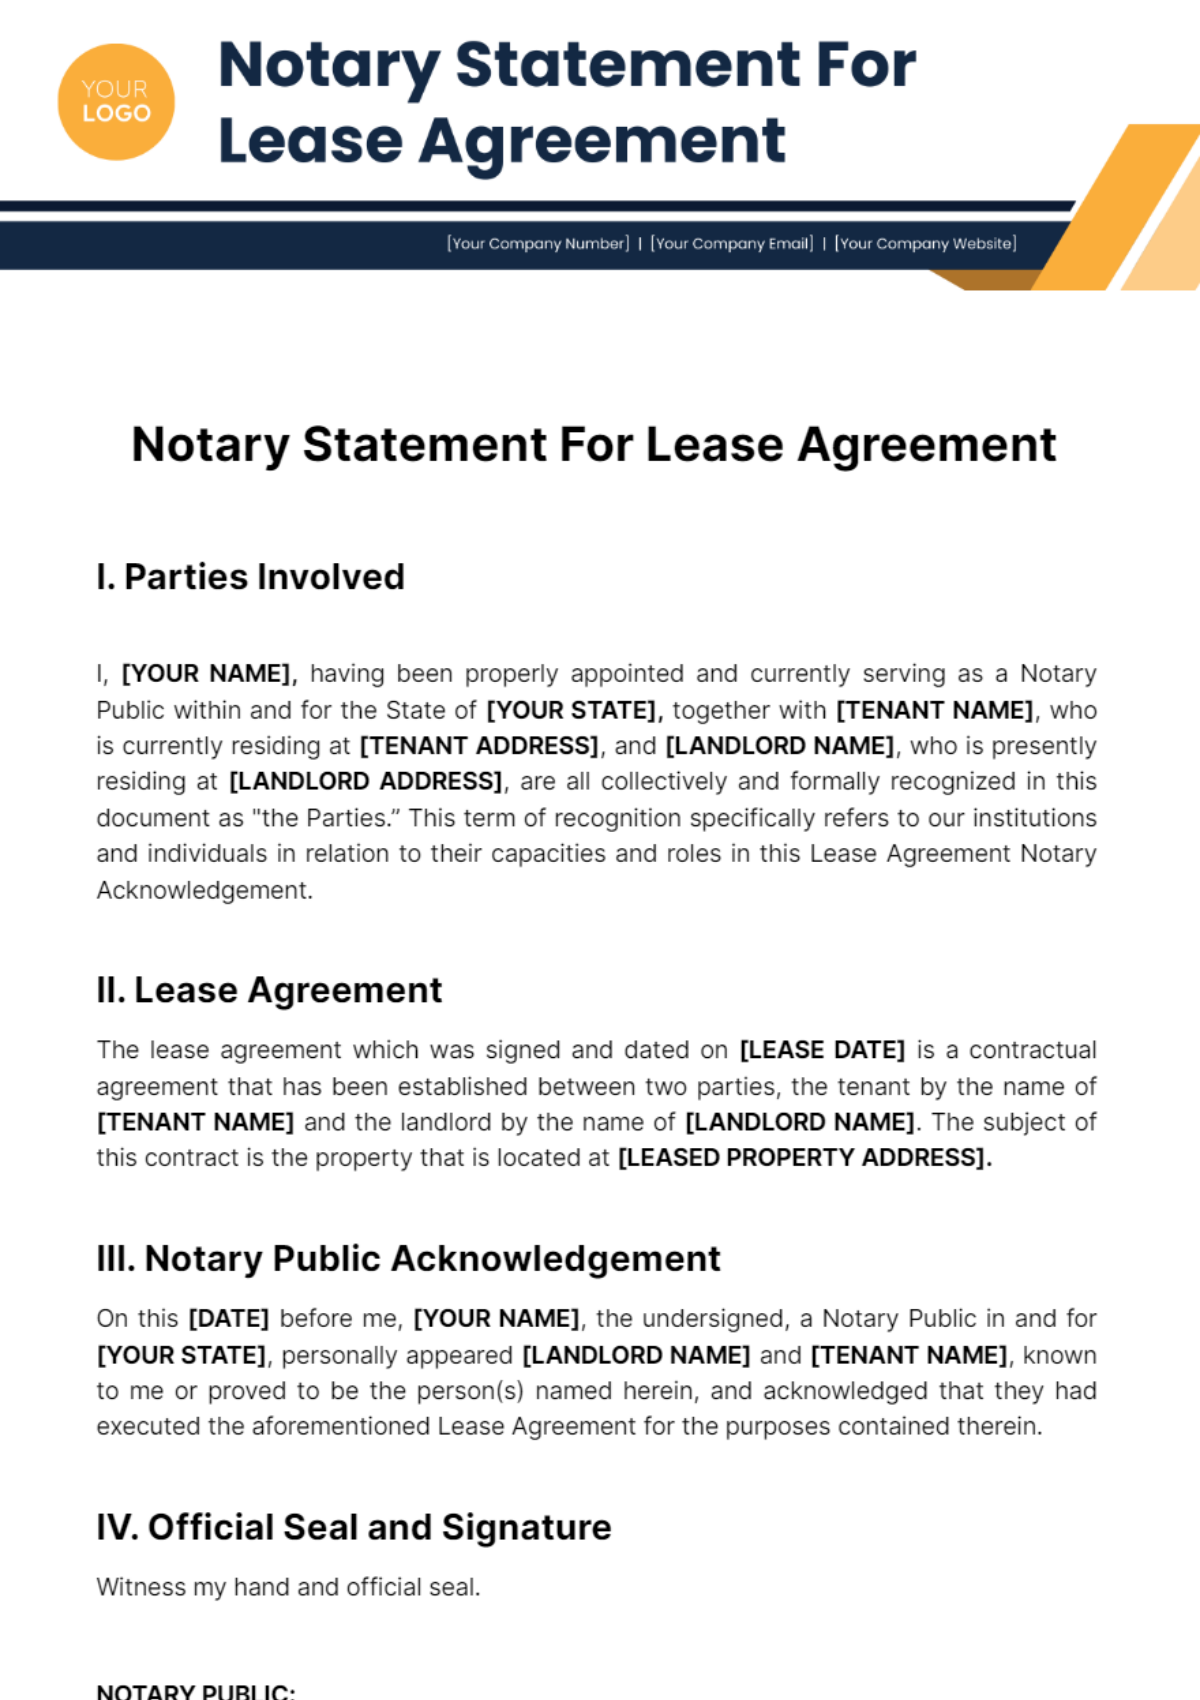 Free Notary Statement For Lease Agreement Template